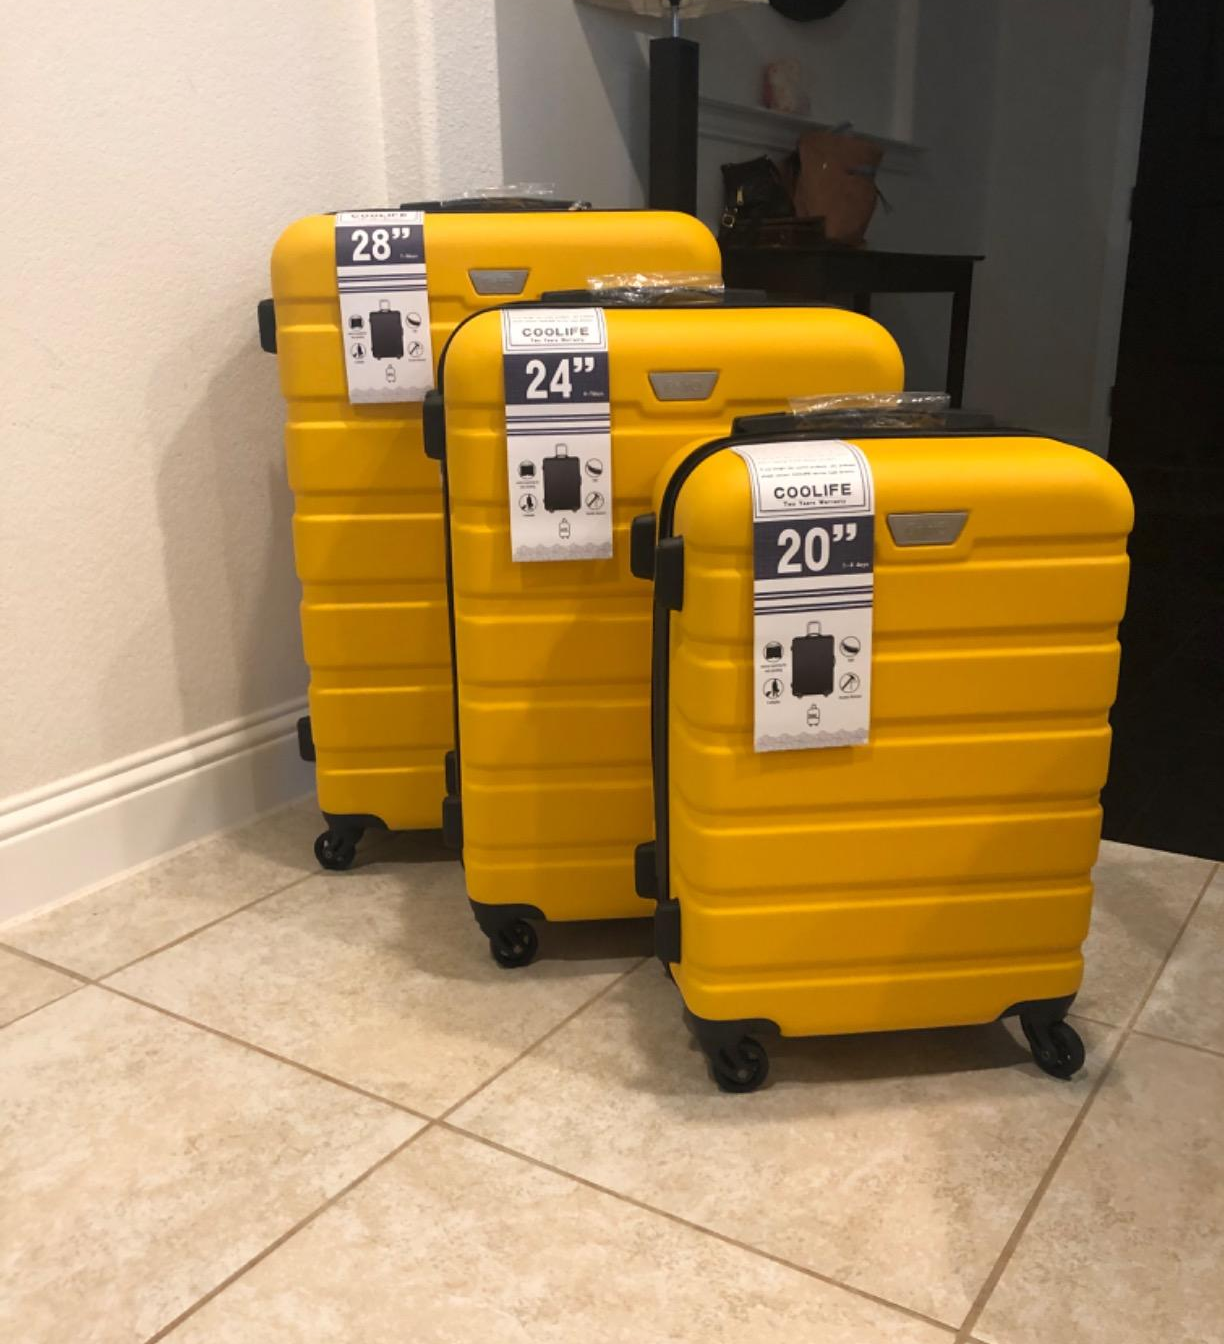 Reviewer photo of the three piece luggage set in a bright yellow color